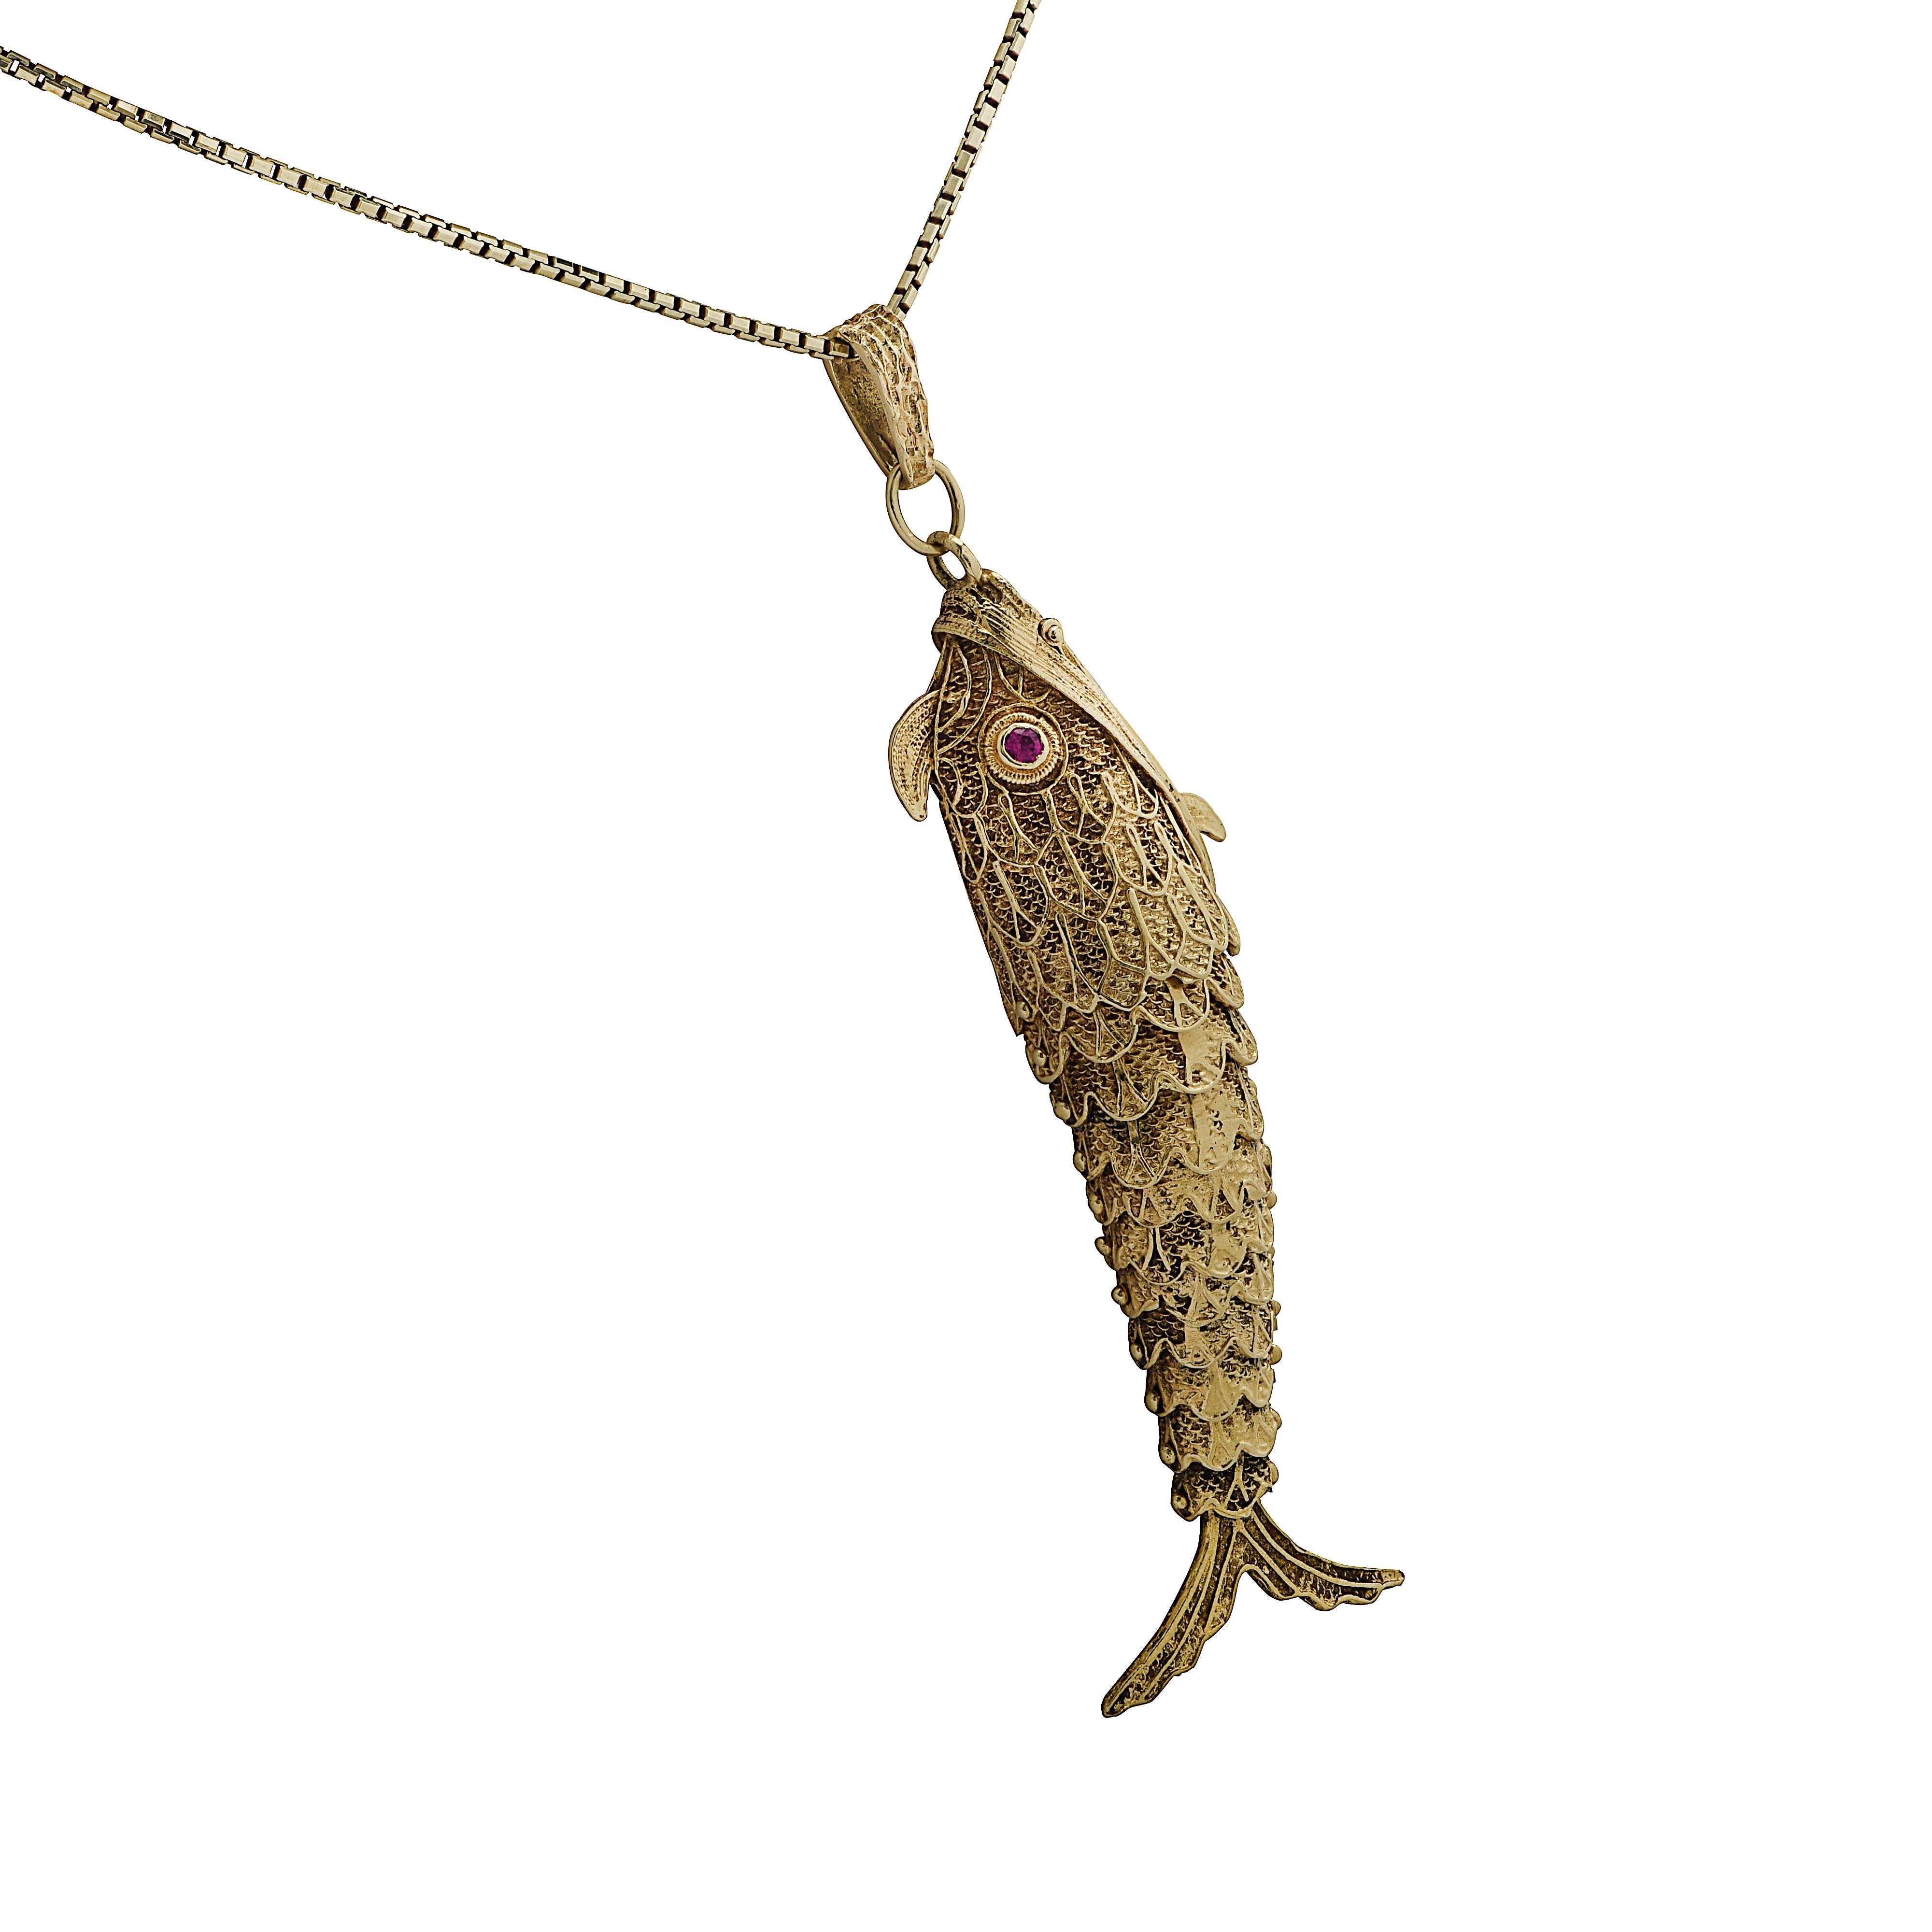 fish necklace meaning